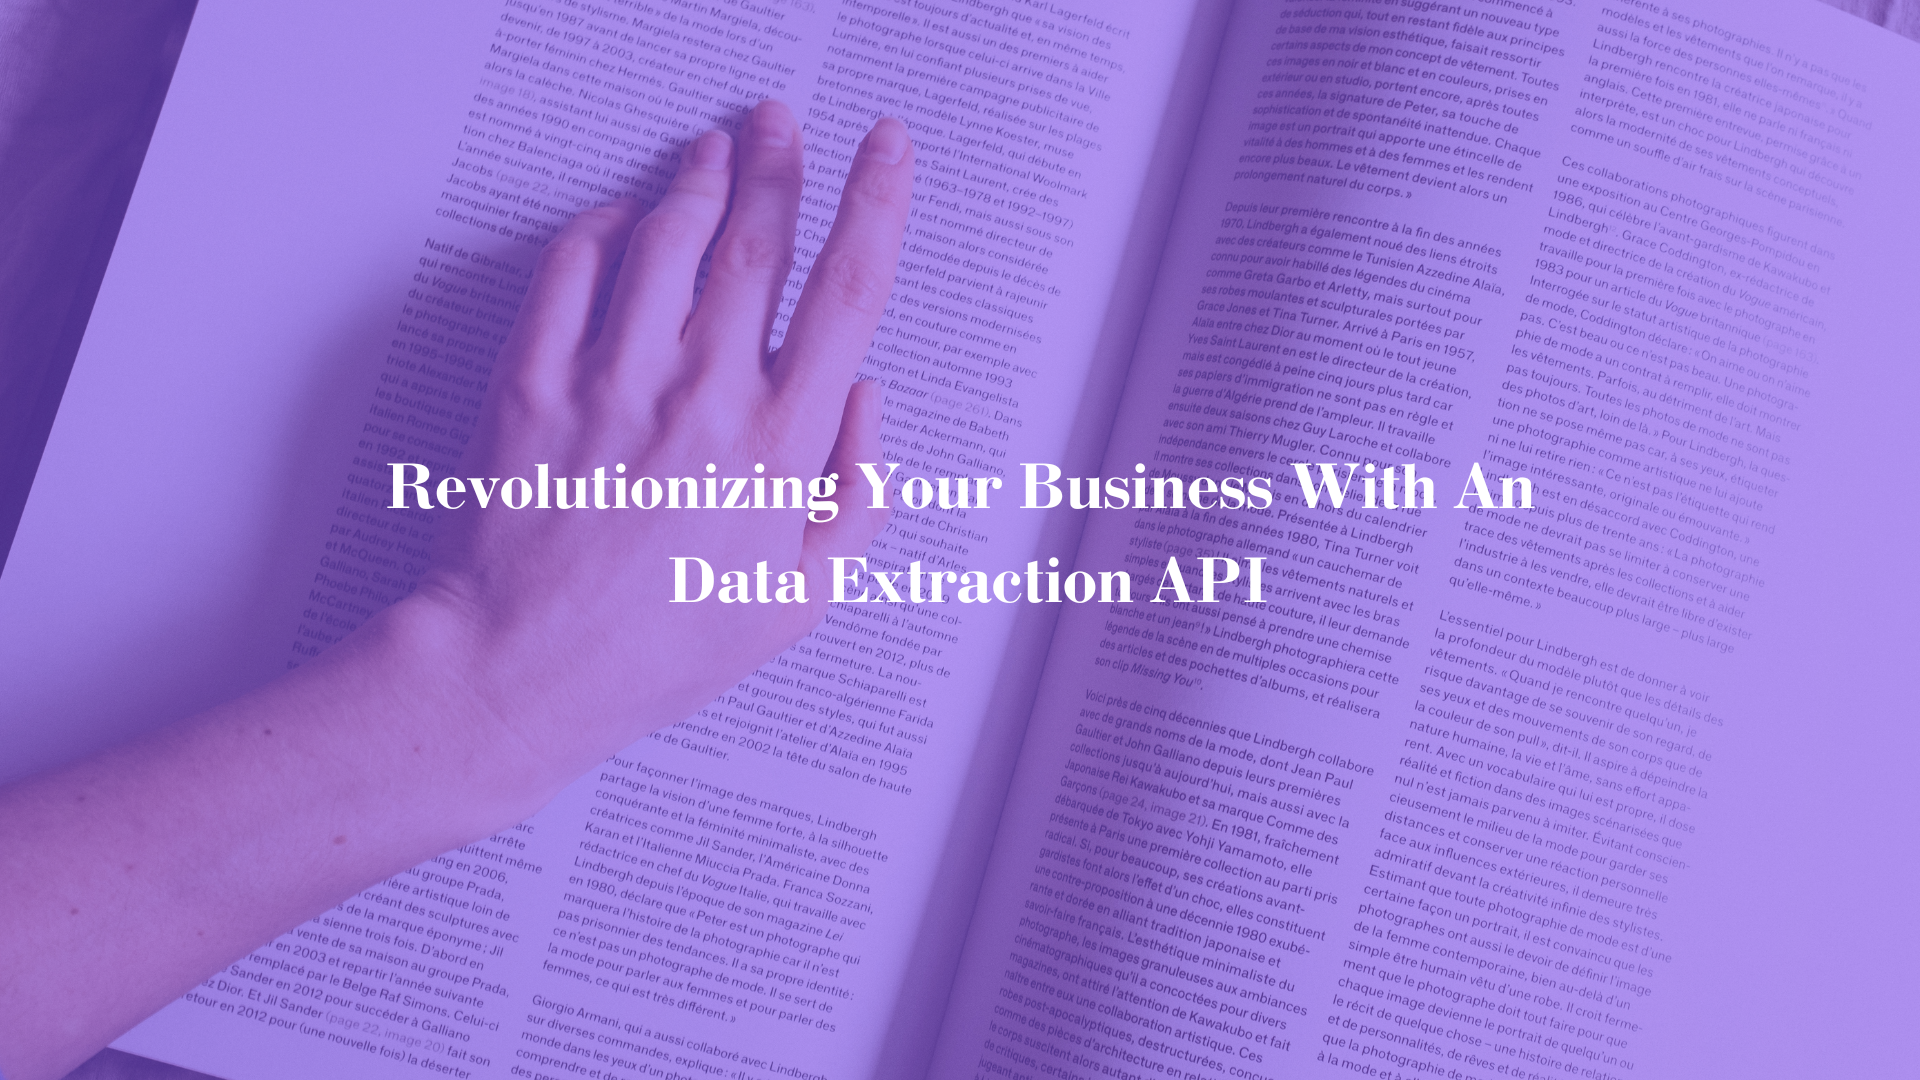 Revolutionizing Your Business With An Data Extraction API